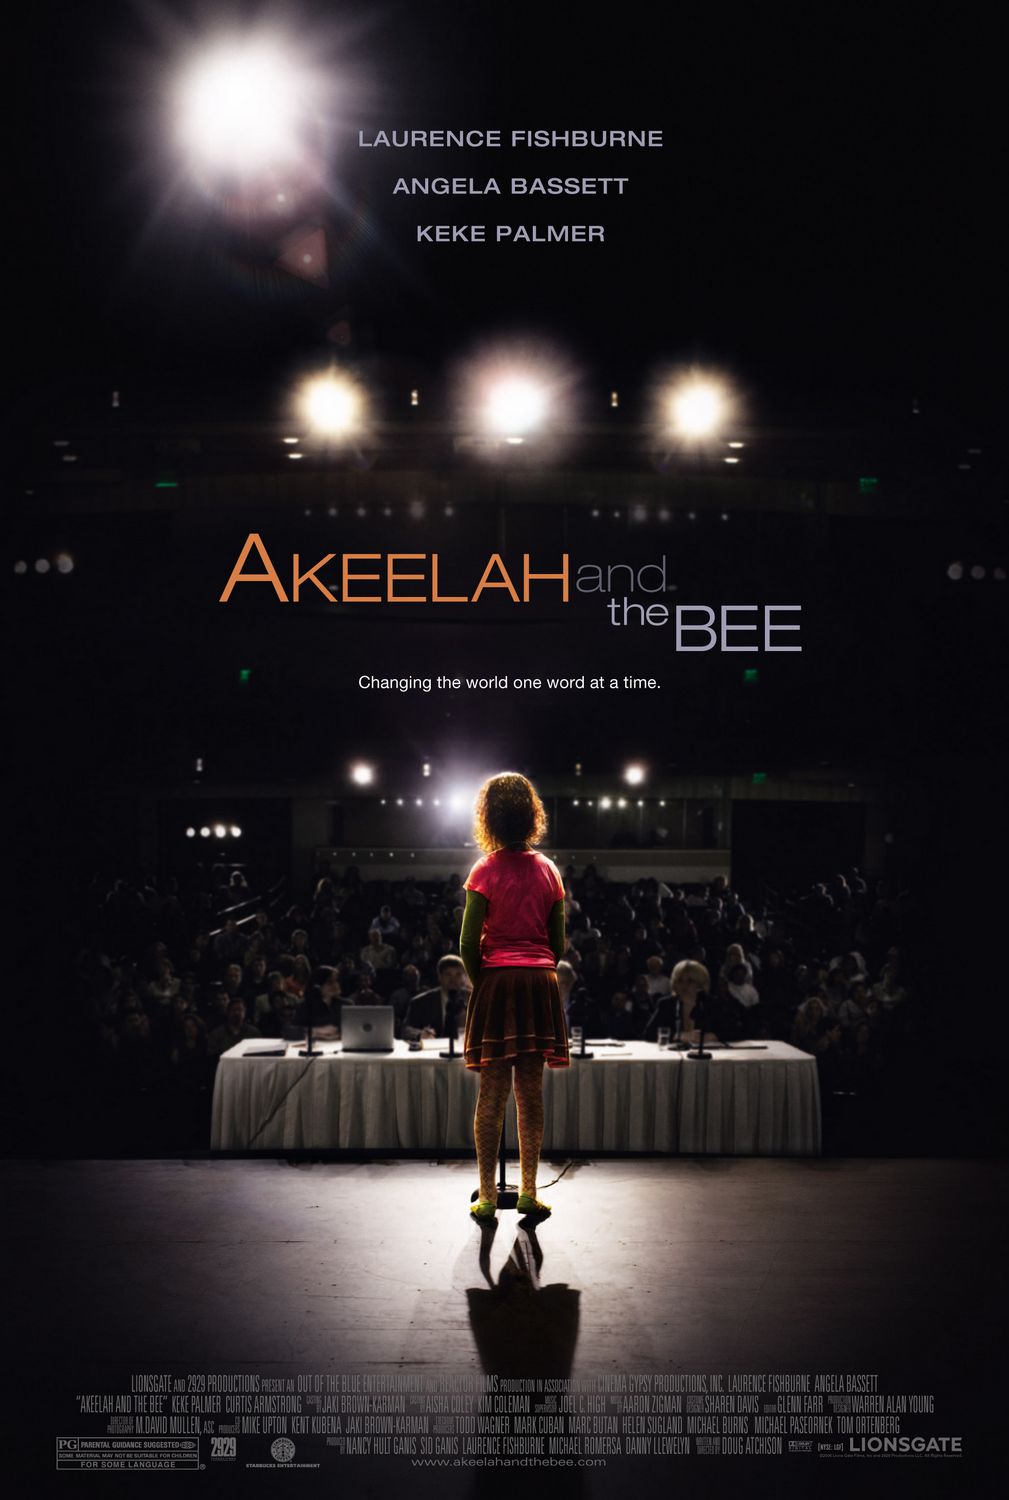 Extra Large Movie Poster Image for Akeelah and the Bee 